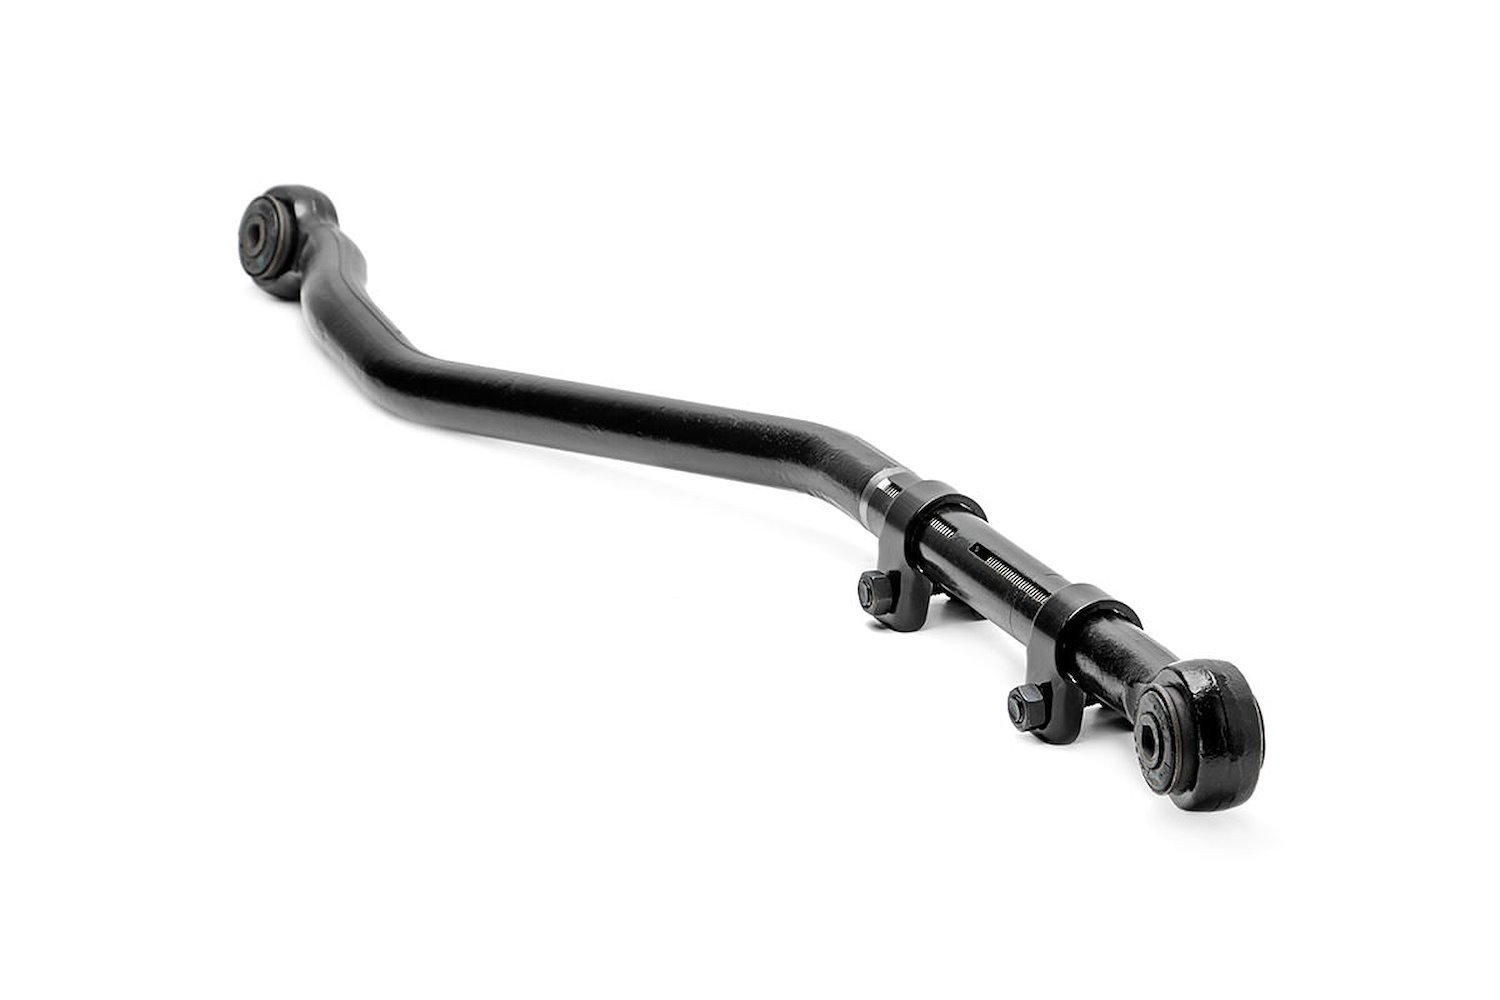 10512 Rear Forged Adjustable Track Bar for 0-4-inch Lifts